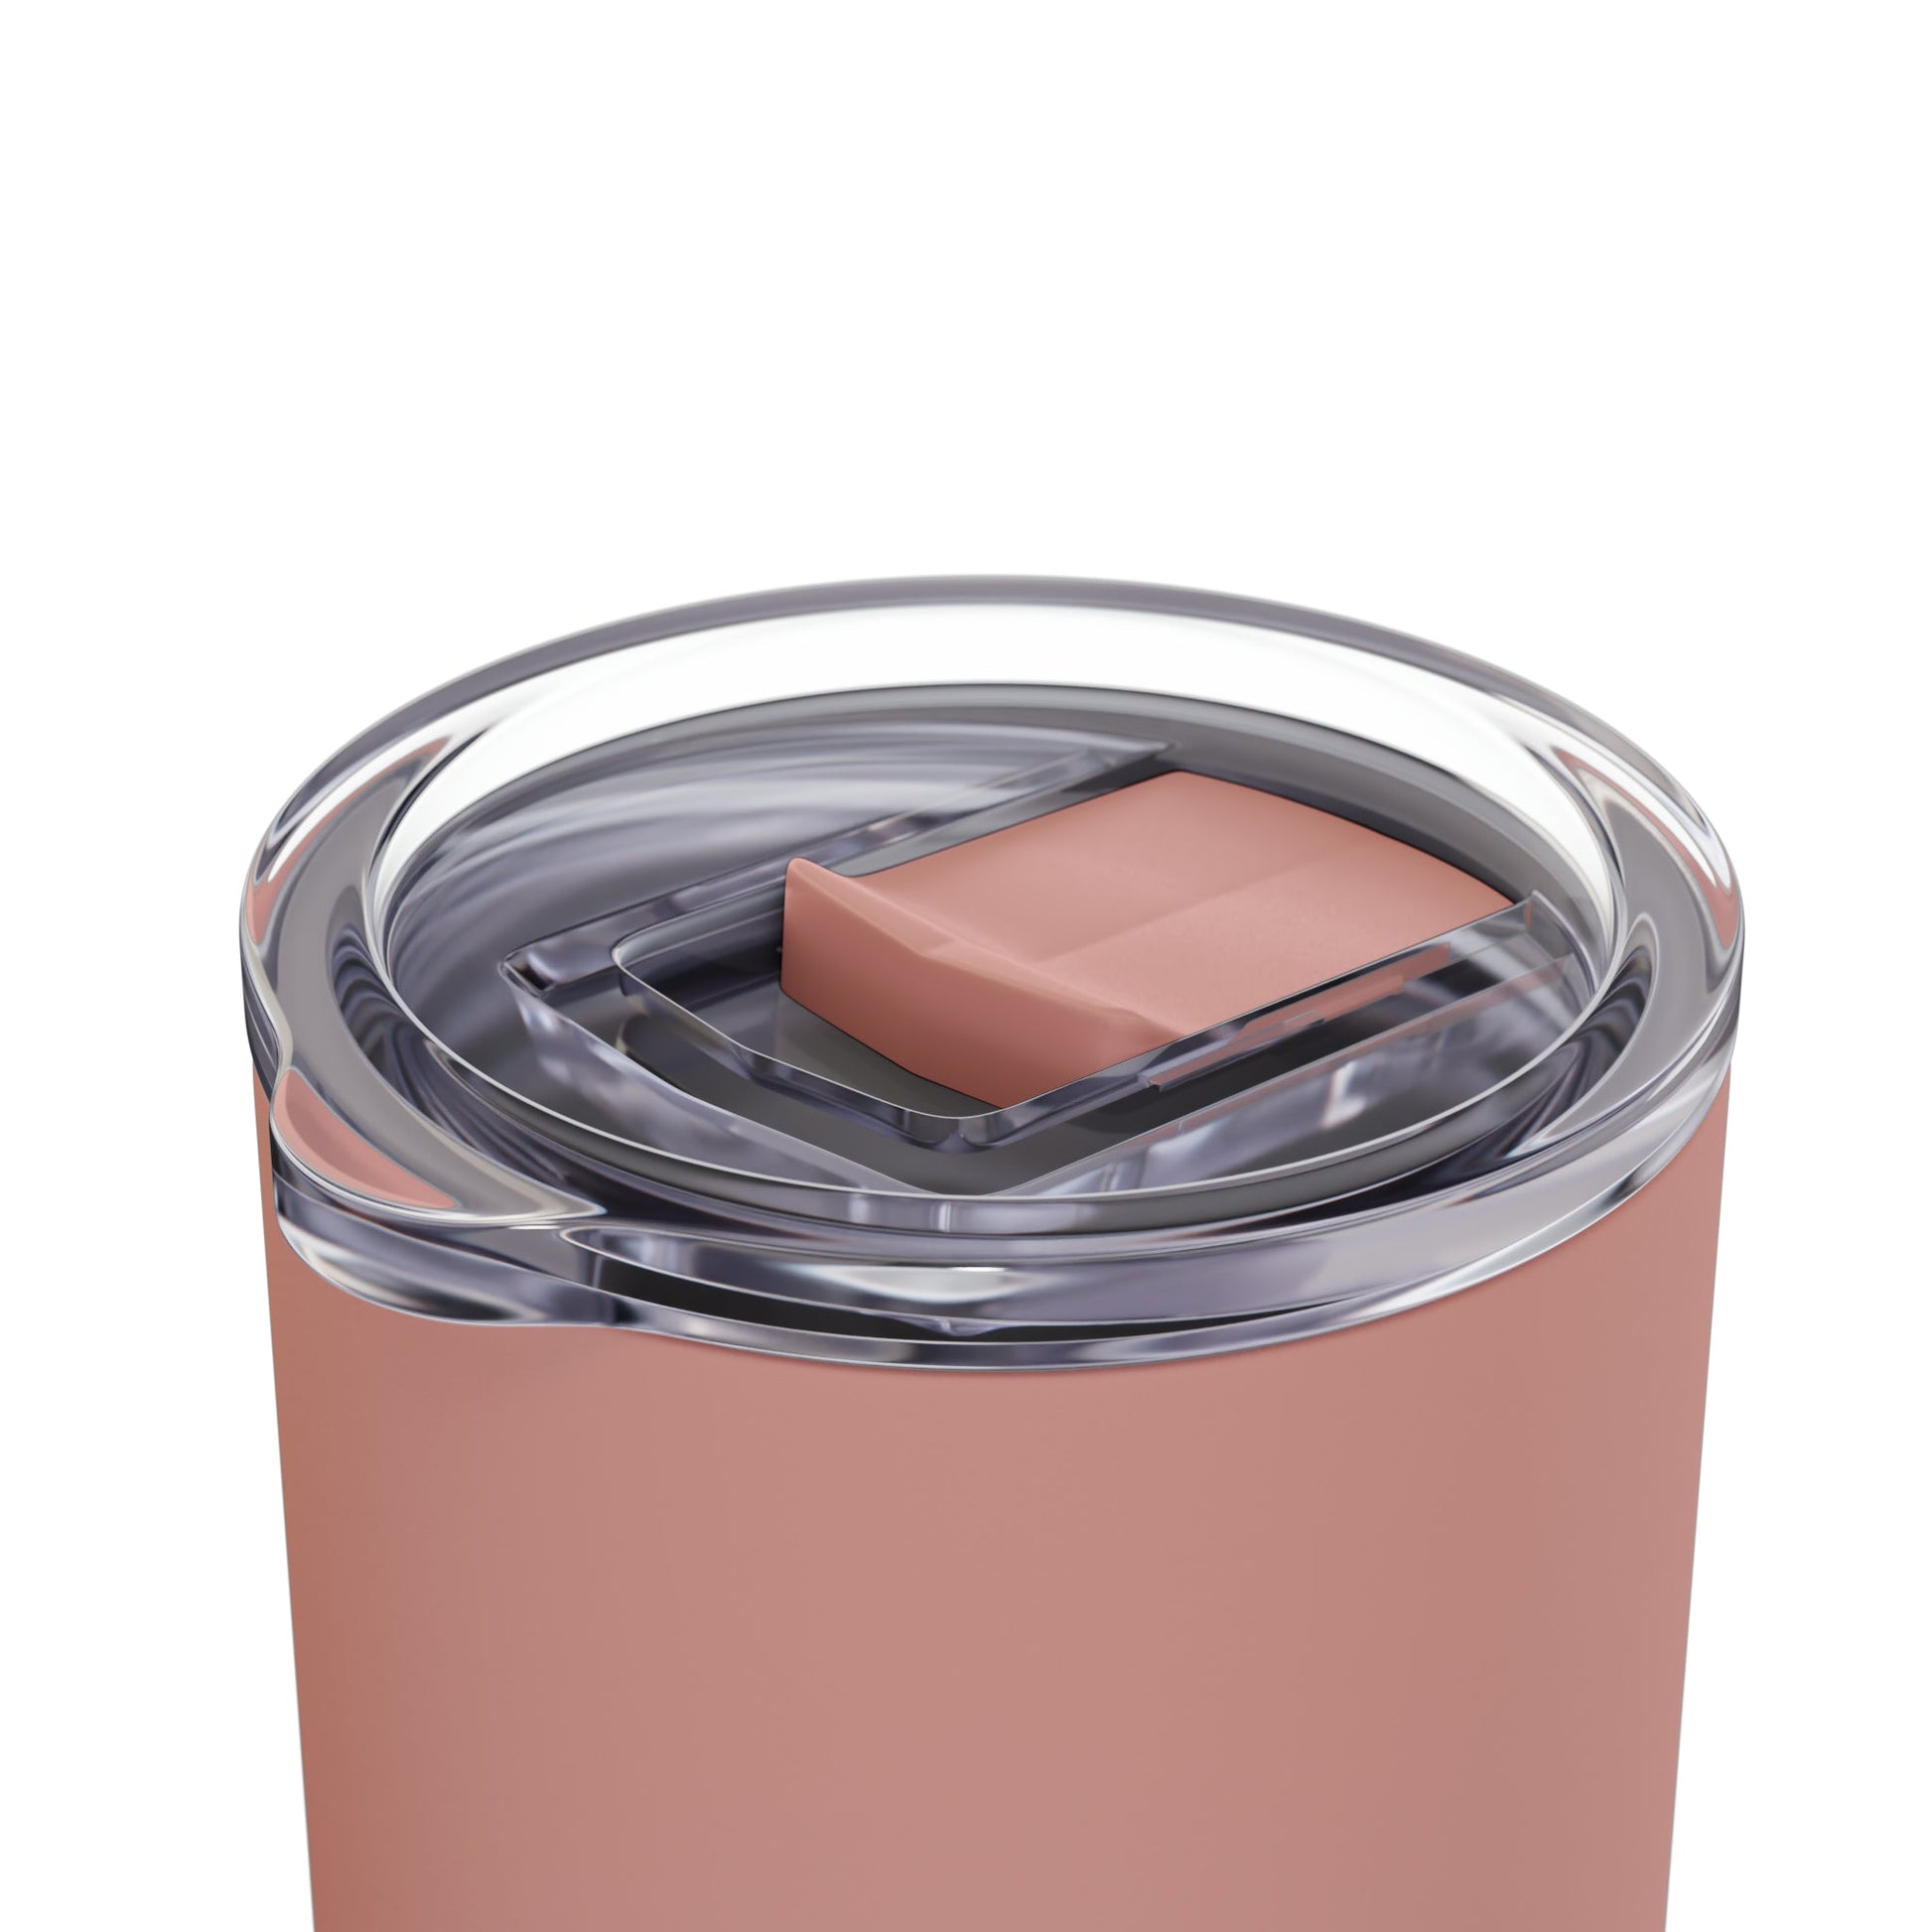 Powered By Coffee Skinny Matte Tumbler - Dusty Rose / 20oz